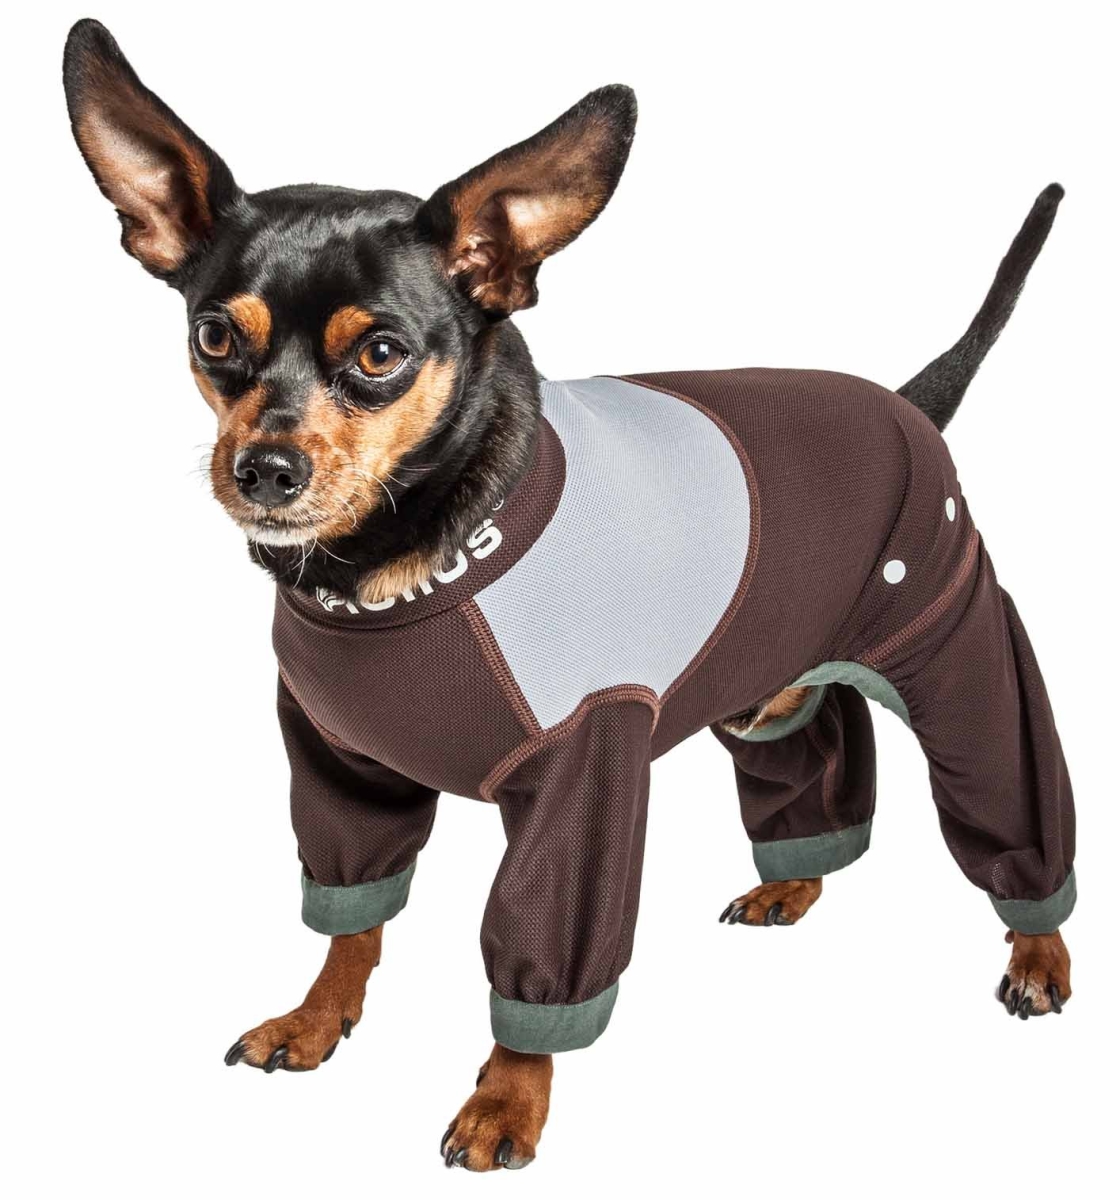 Yghl9brxl Tail Runner 4-way-stretch Breathable Full Bodied Performance Dog Track Suit - Brown & Grey, Extra Large